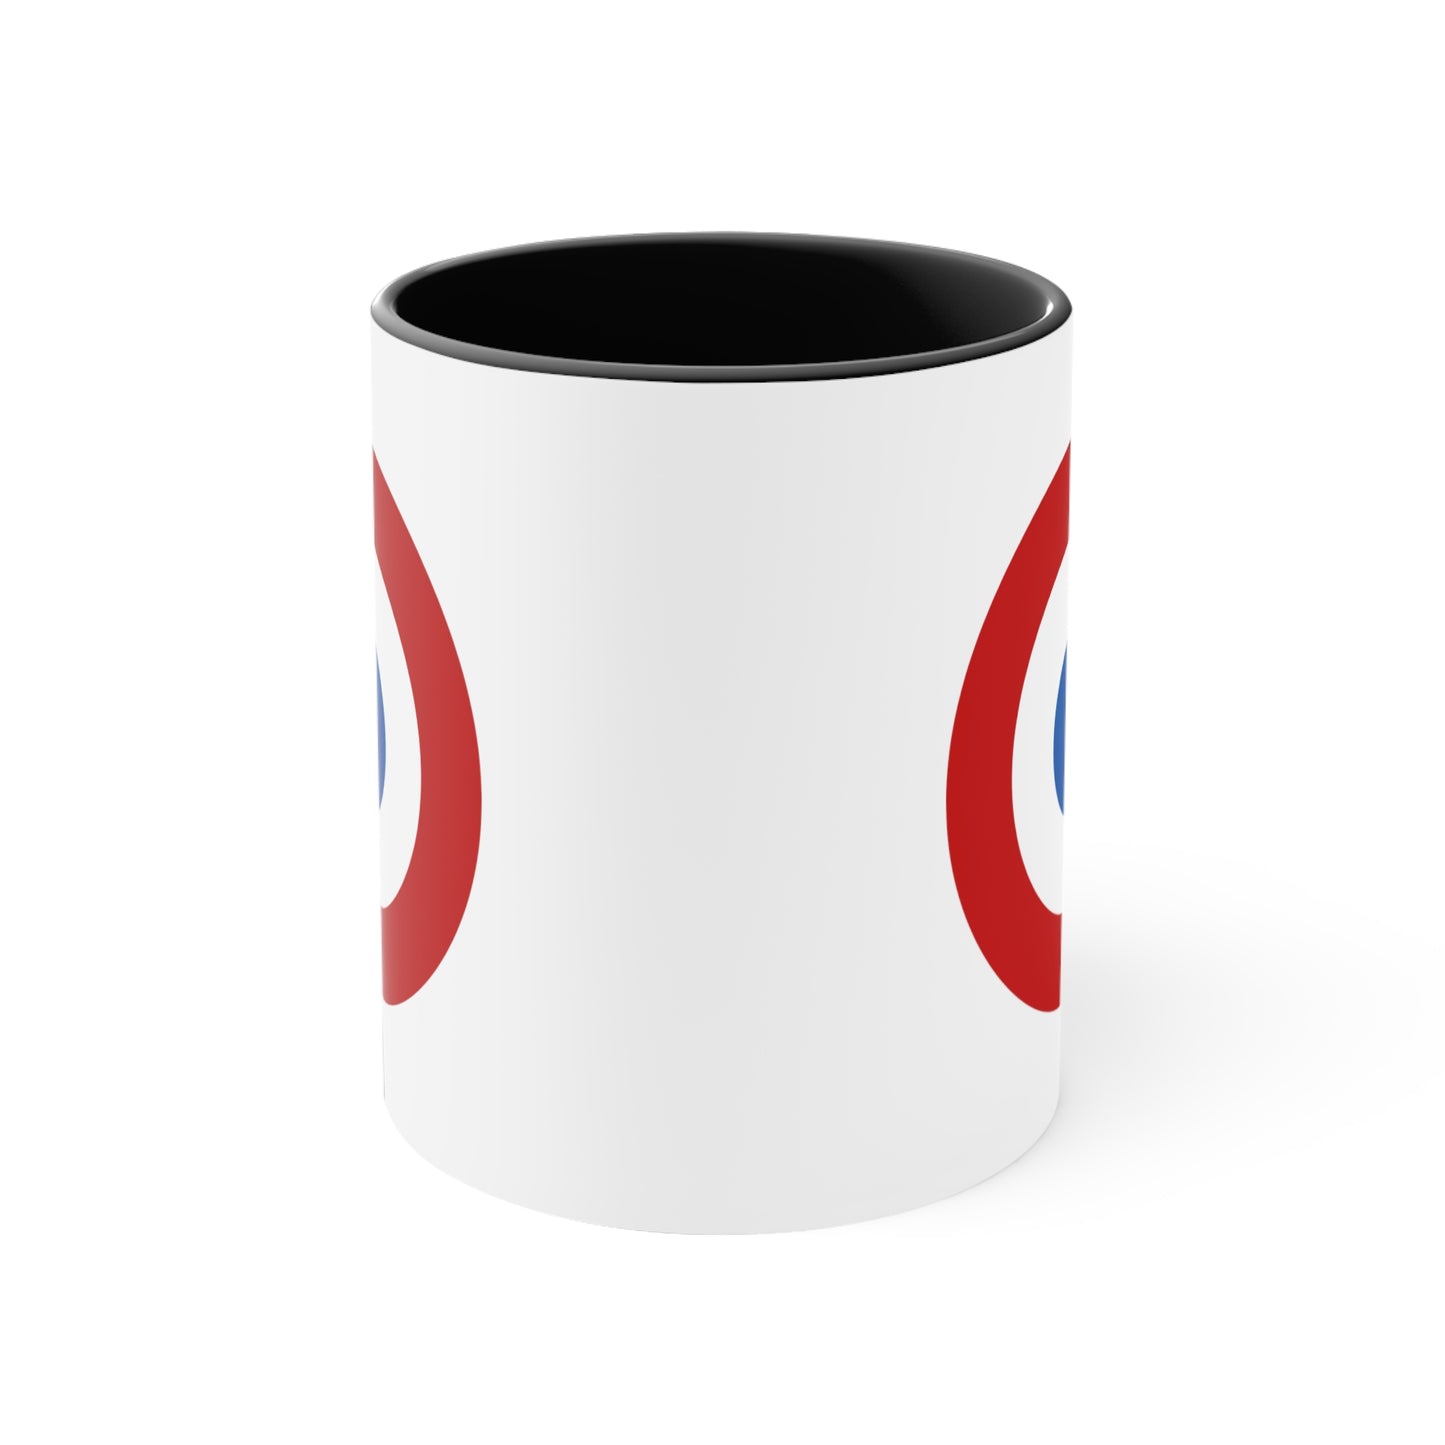 French Air Force Roundel Coffee Mug - Double Sided Black Accent Ceramic 11oz - by TheGlassyLass.com